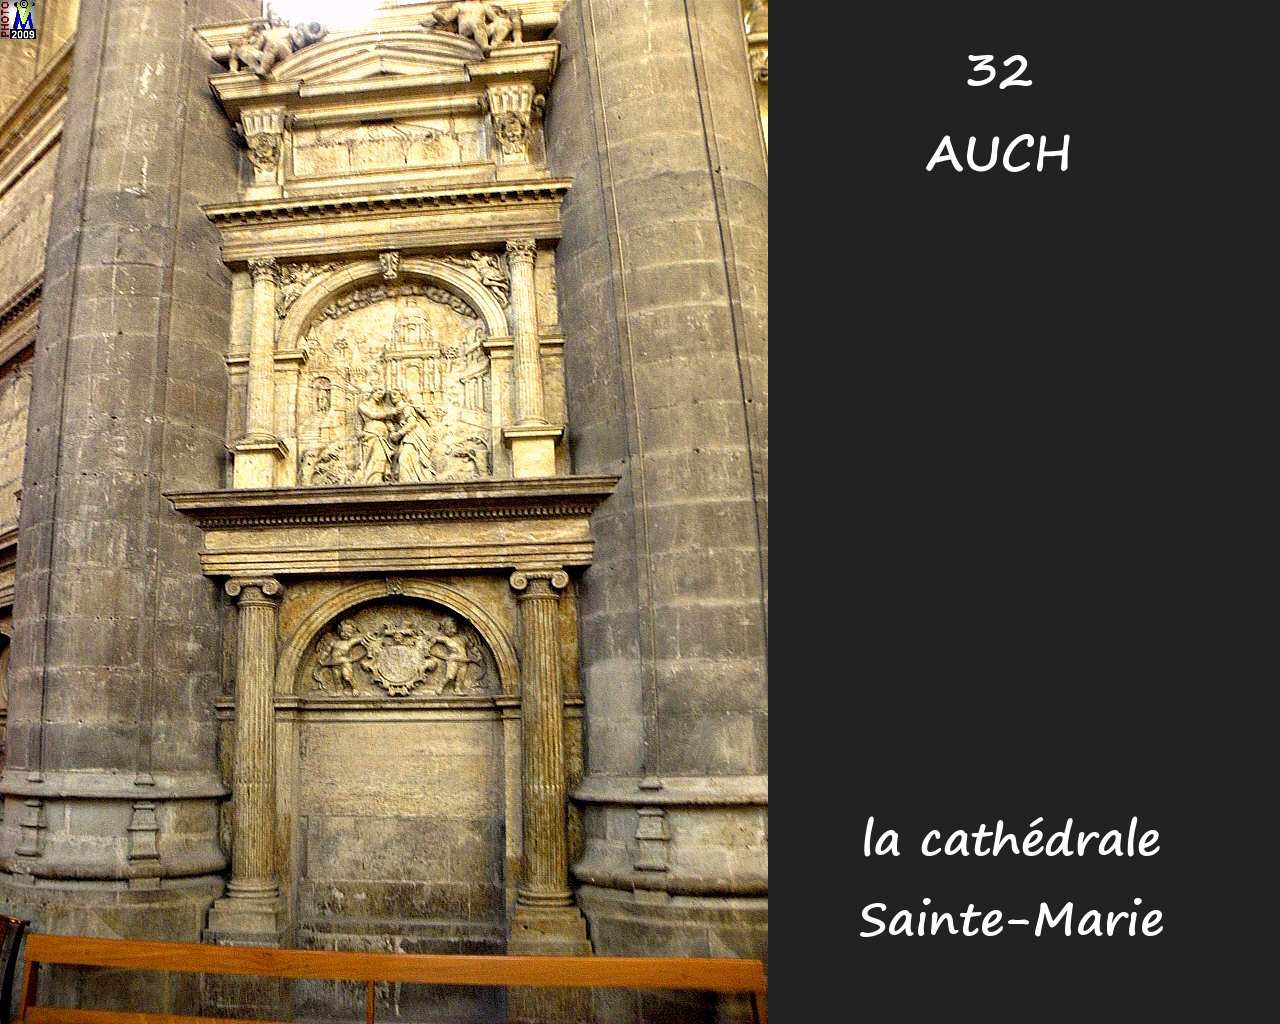 32AUCH_cathedrale_238.jpg